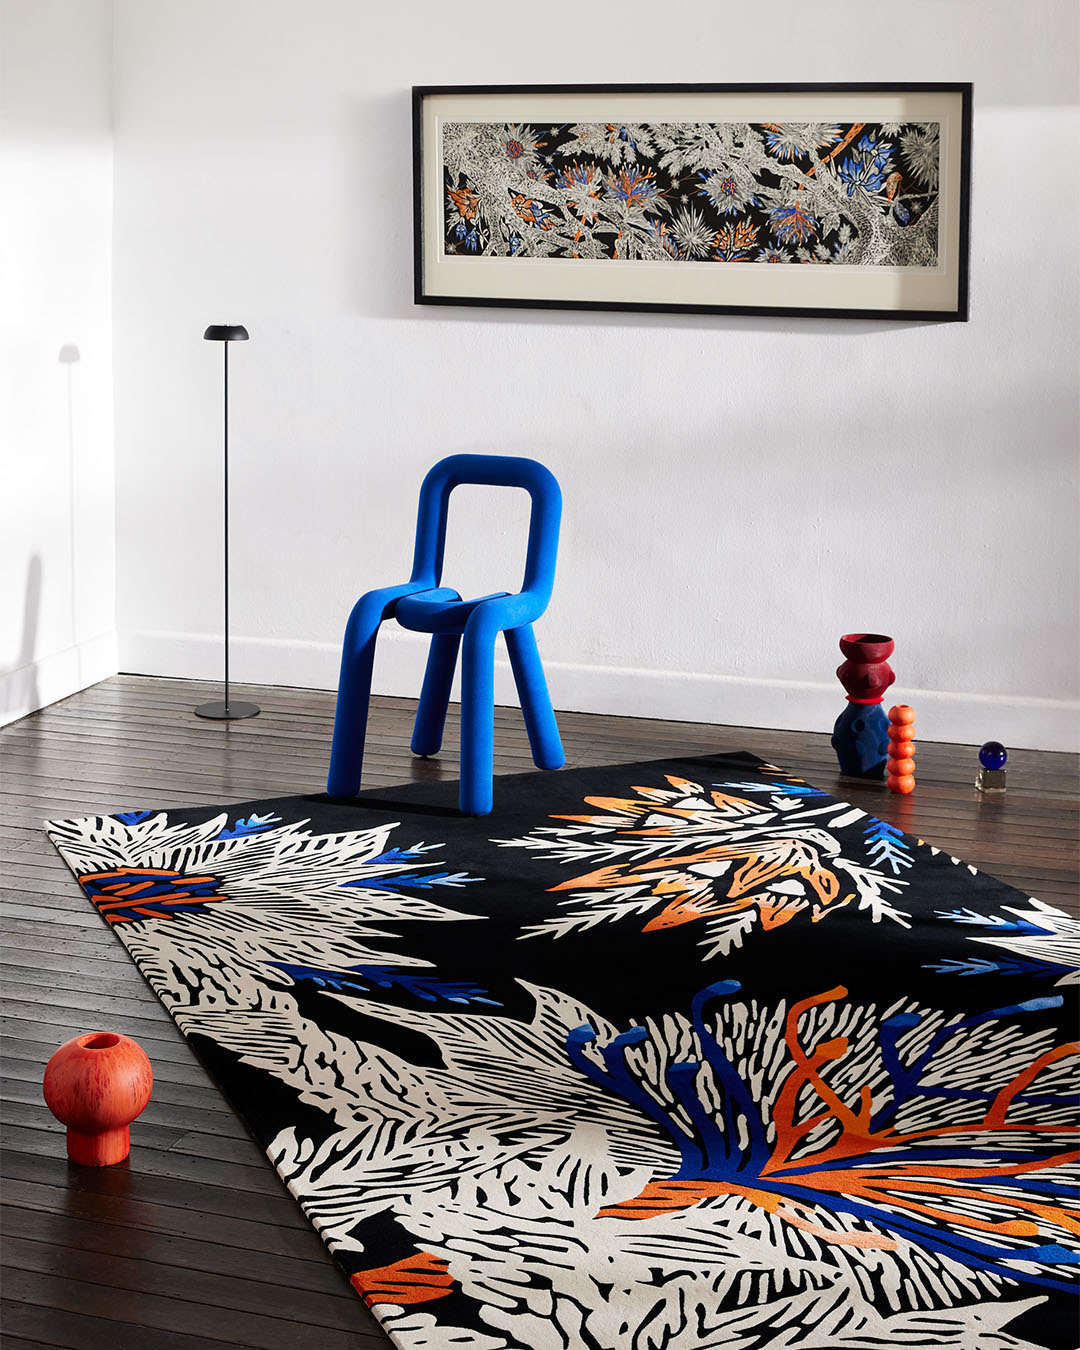 Styled image of floral Complex Ecologies rug by Tamika Grant Iramu